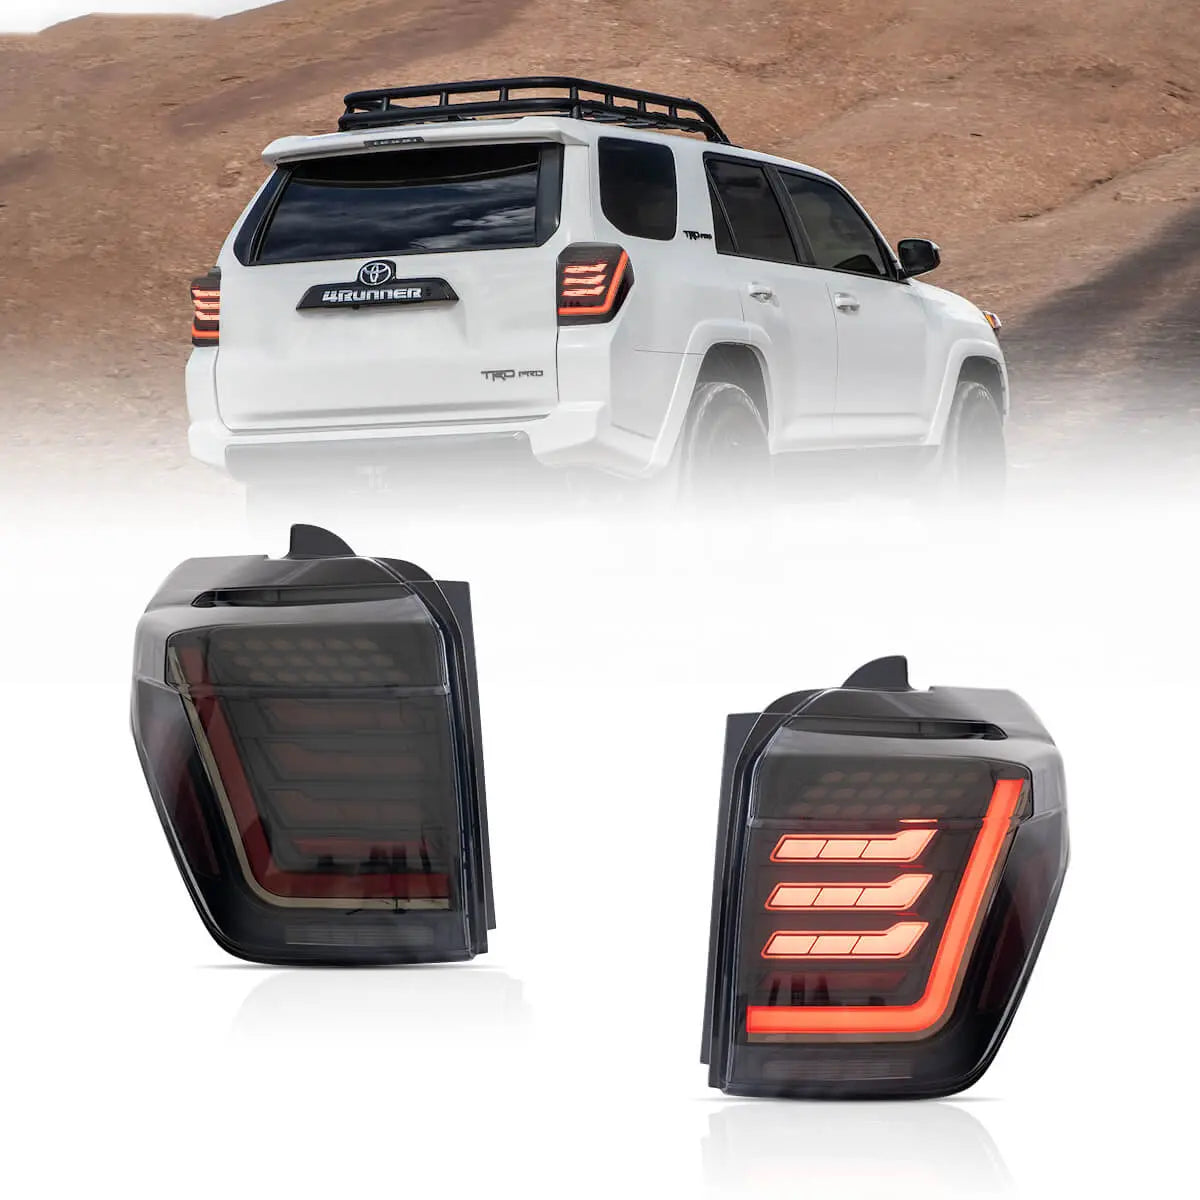 10-22 Toyota 4Runner 5th Gen (N280) Vland LED Tail Lights With Dynamic Welcome Lighting